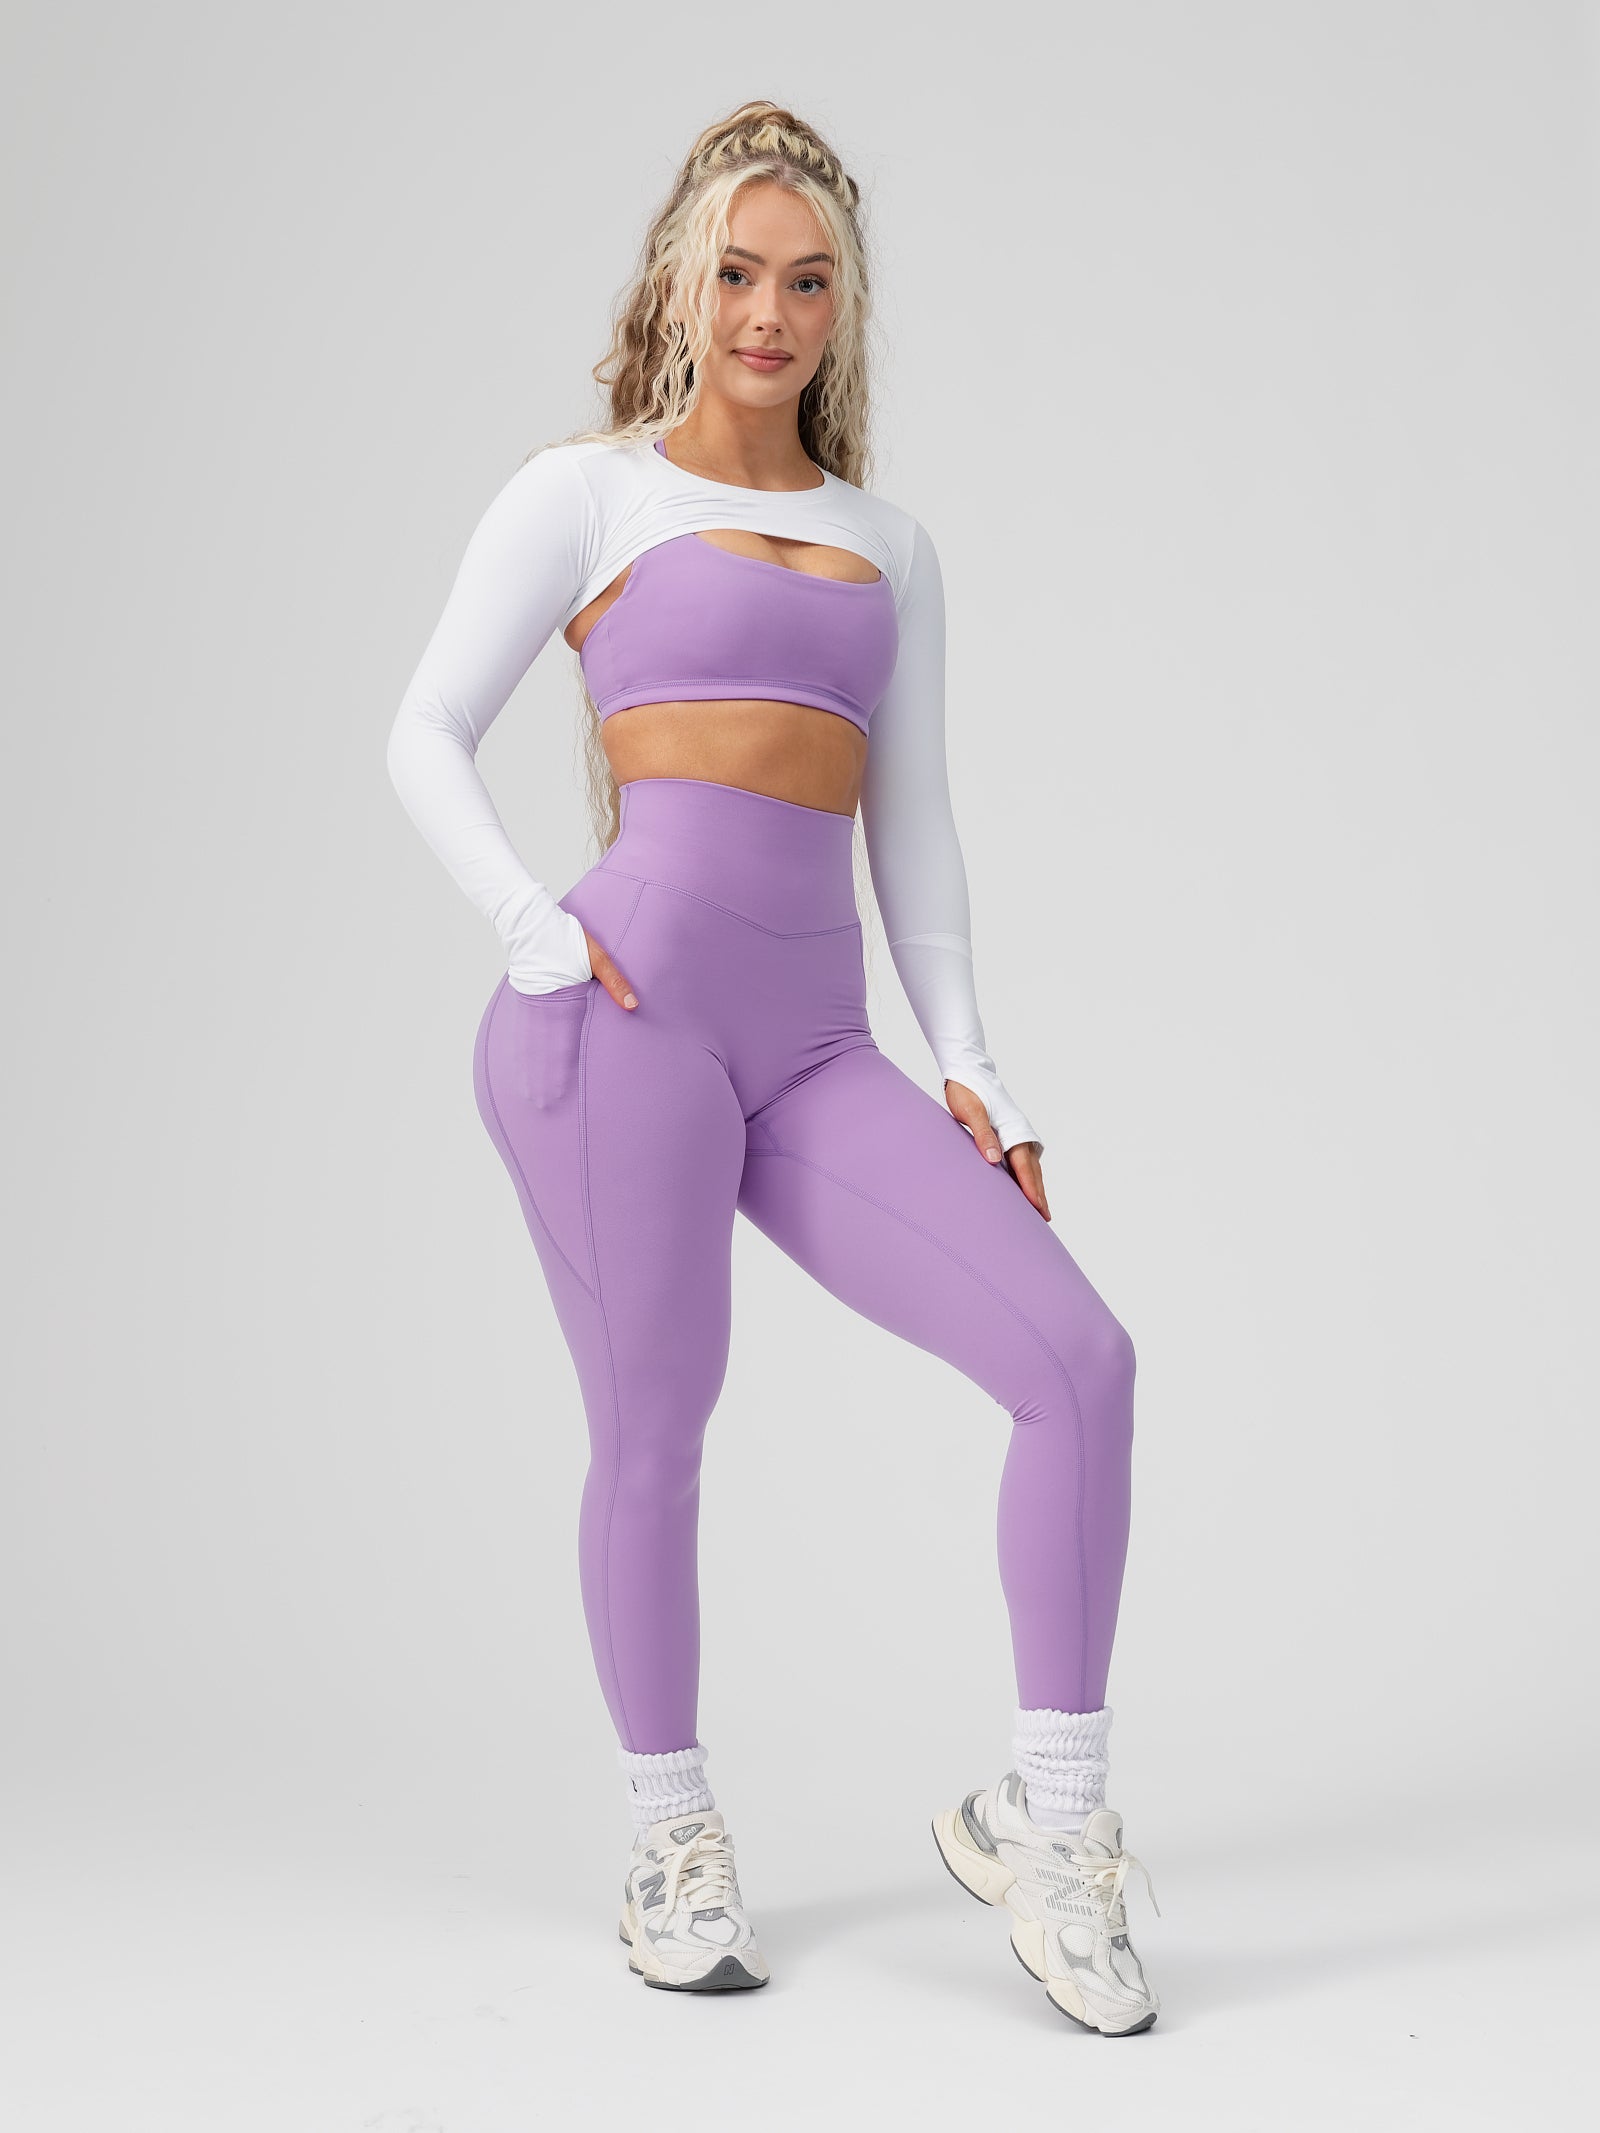 Buffbunny Rosa Pocket Legging Size M - $63 New With Tags - From Kelsey